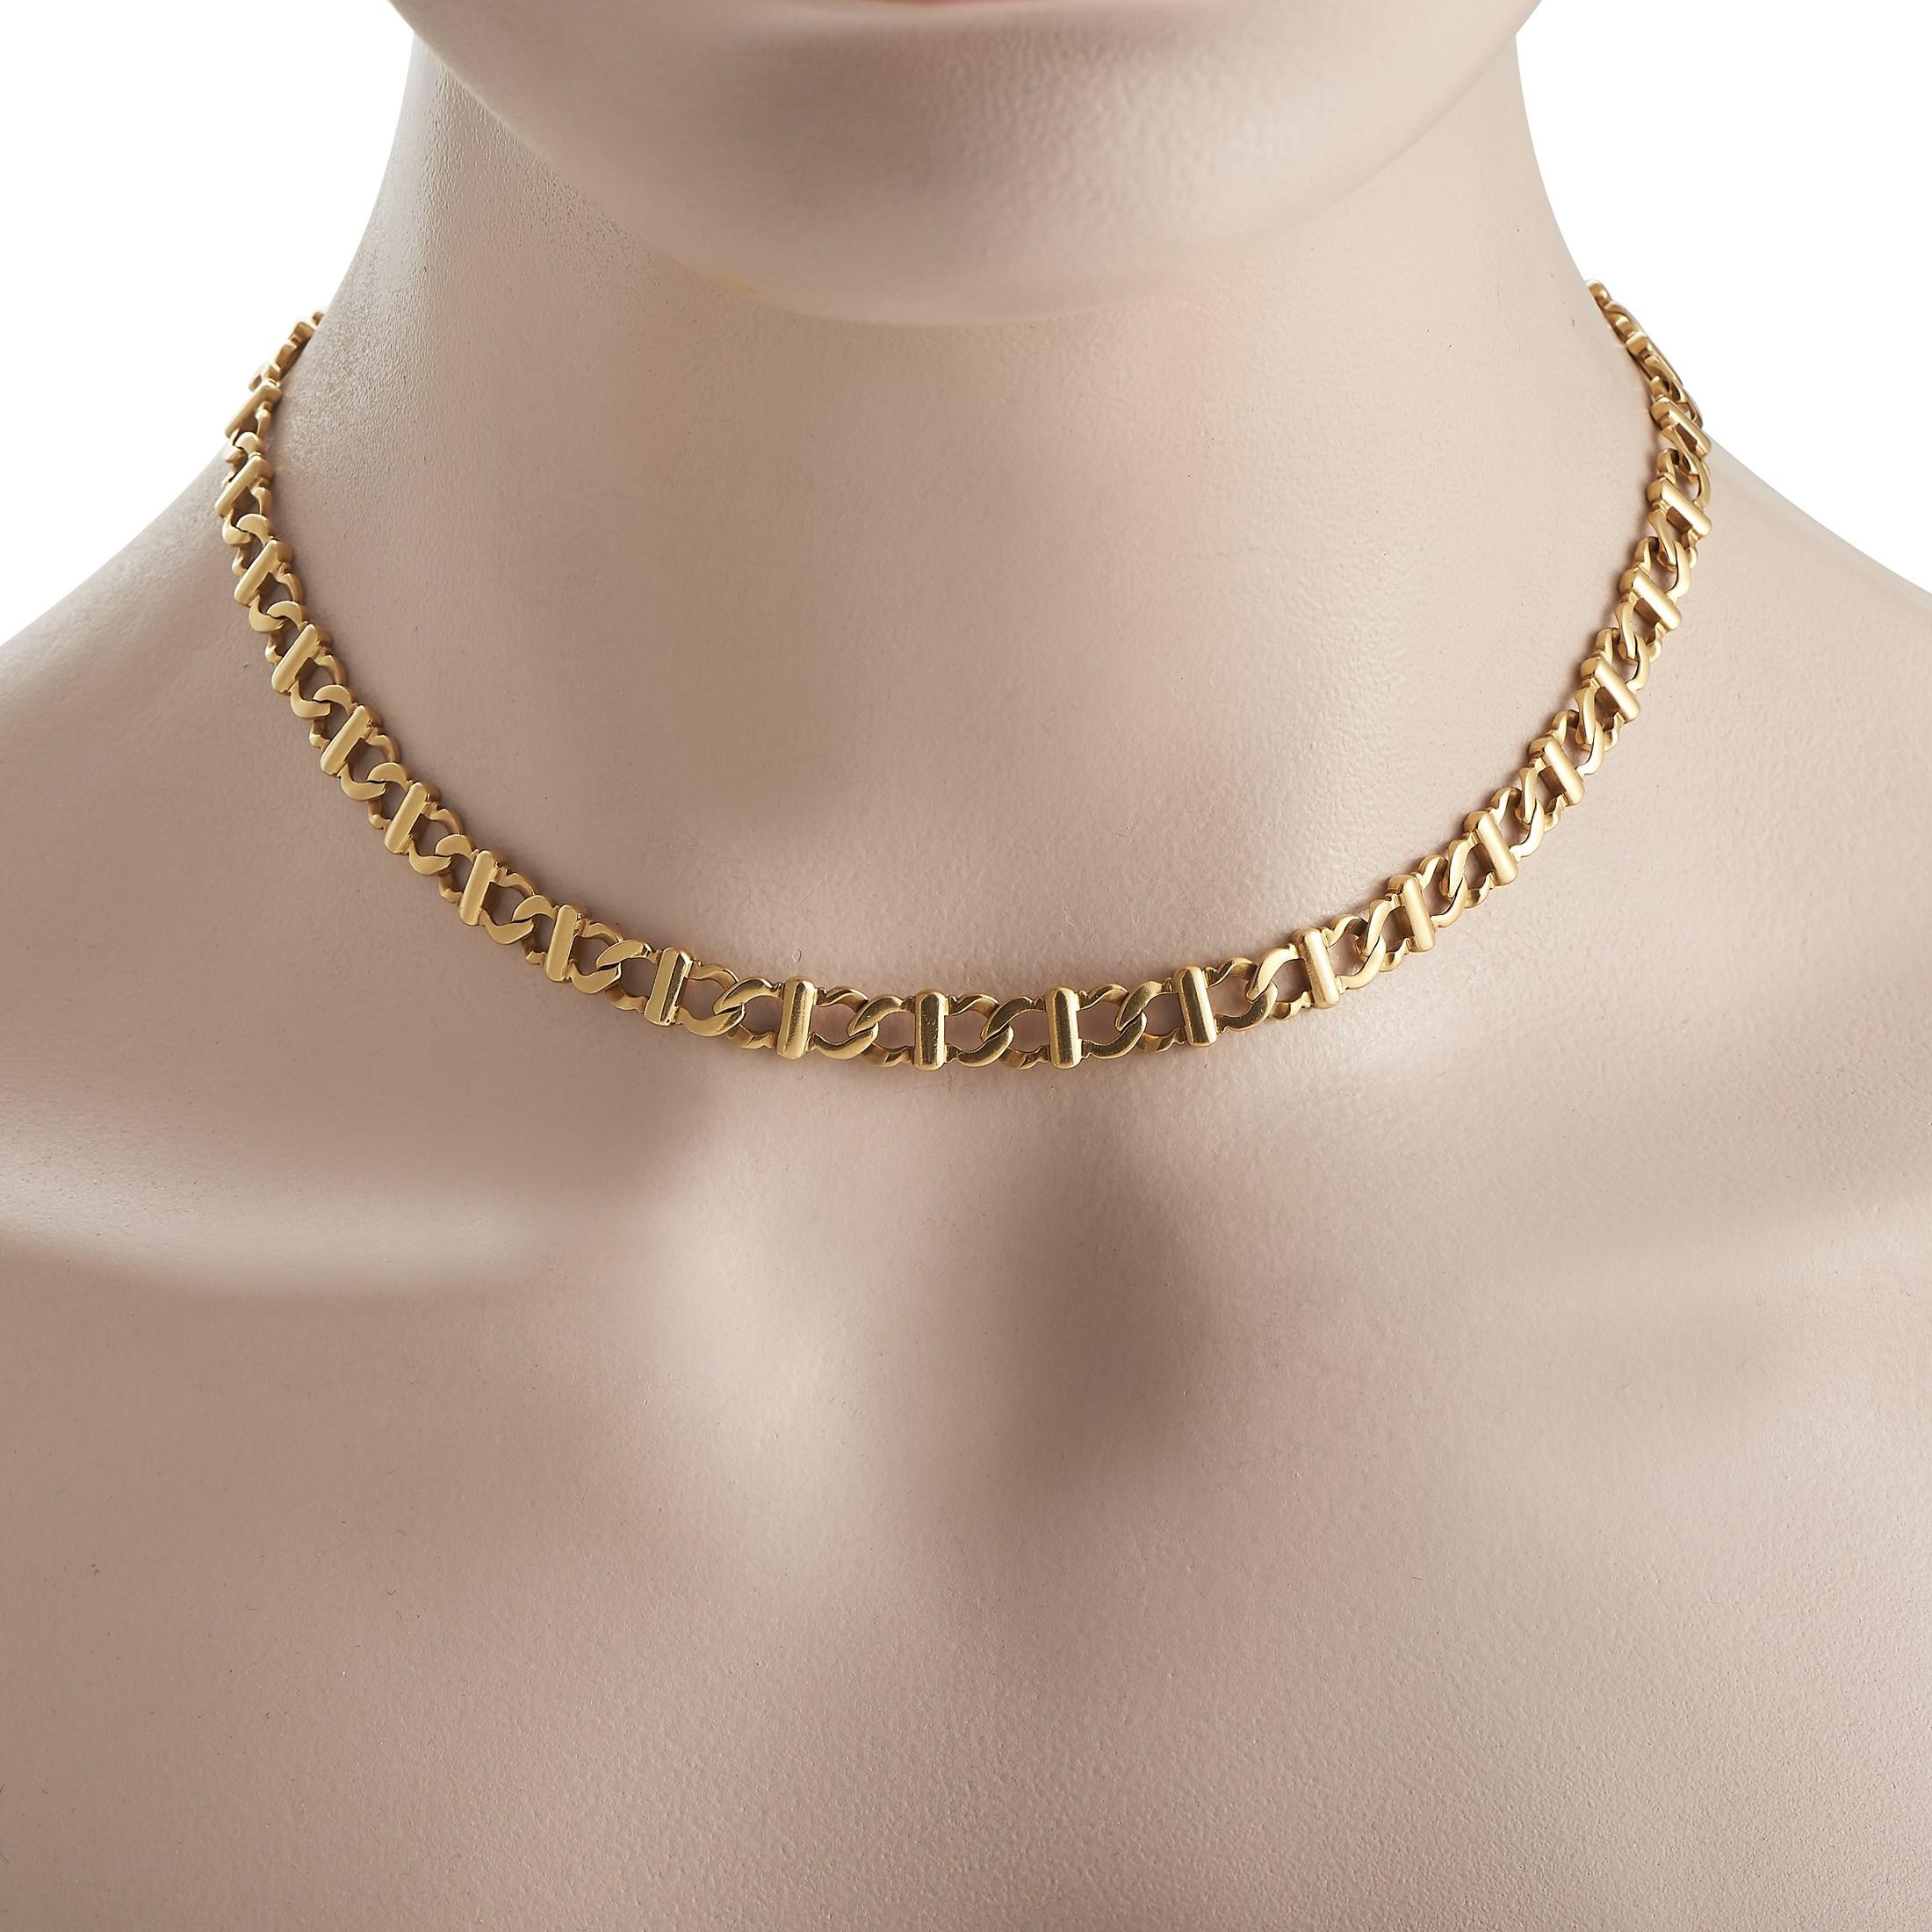 Despite its simplicity, this Cartier link necklace will continually make a statement. This piece measures 16” long and includes a series of links made from opulent 18K yellow gold.

This jewelry piece is offered in estate condition and includes a